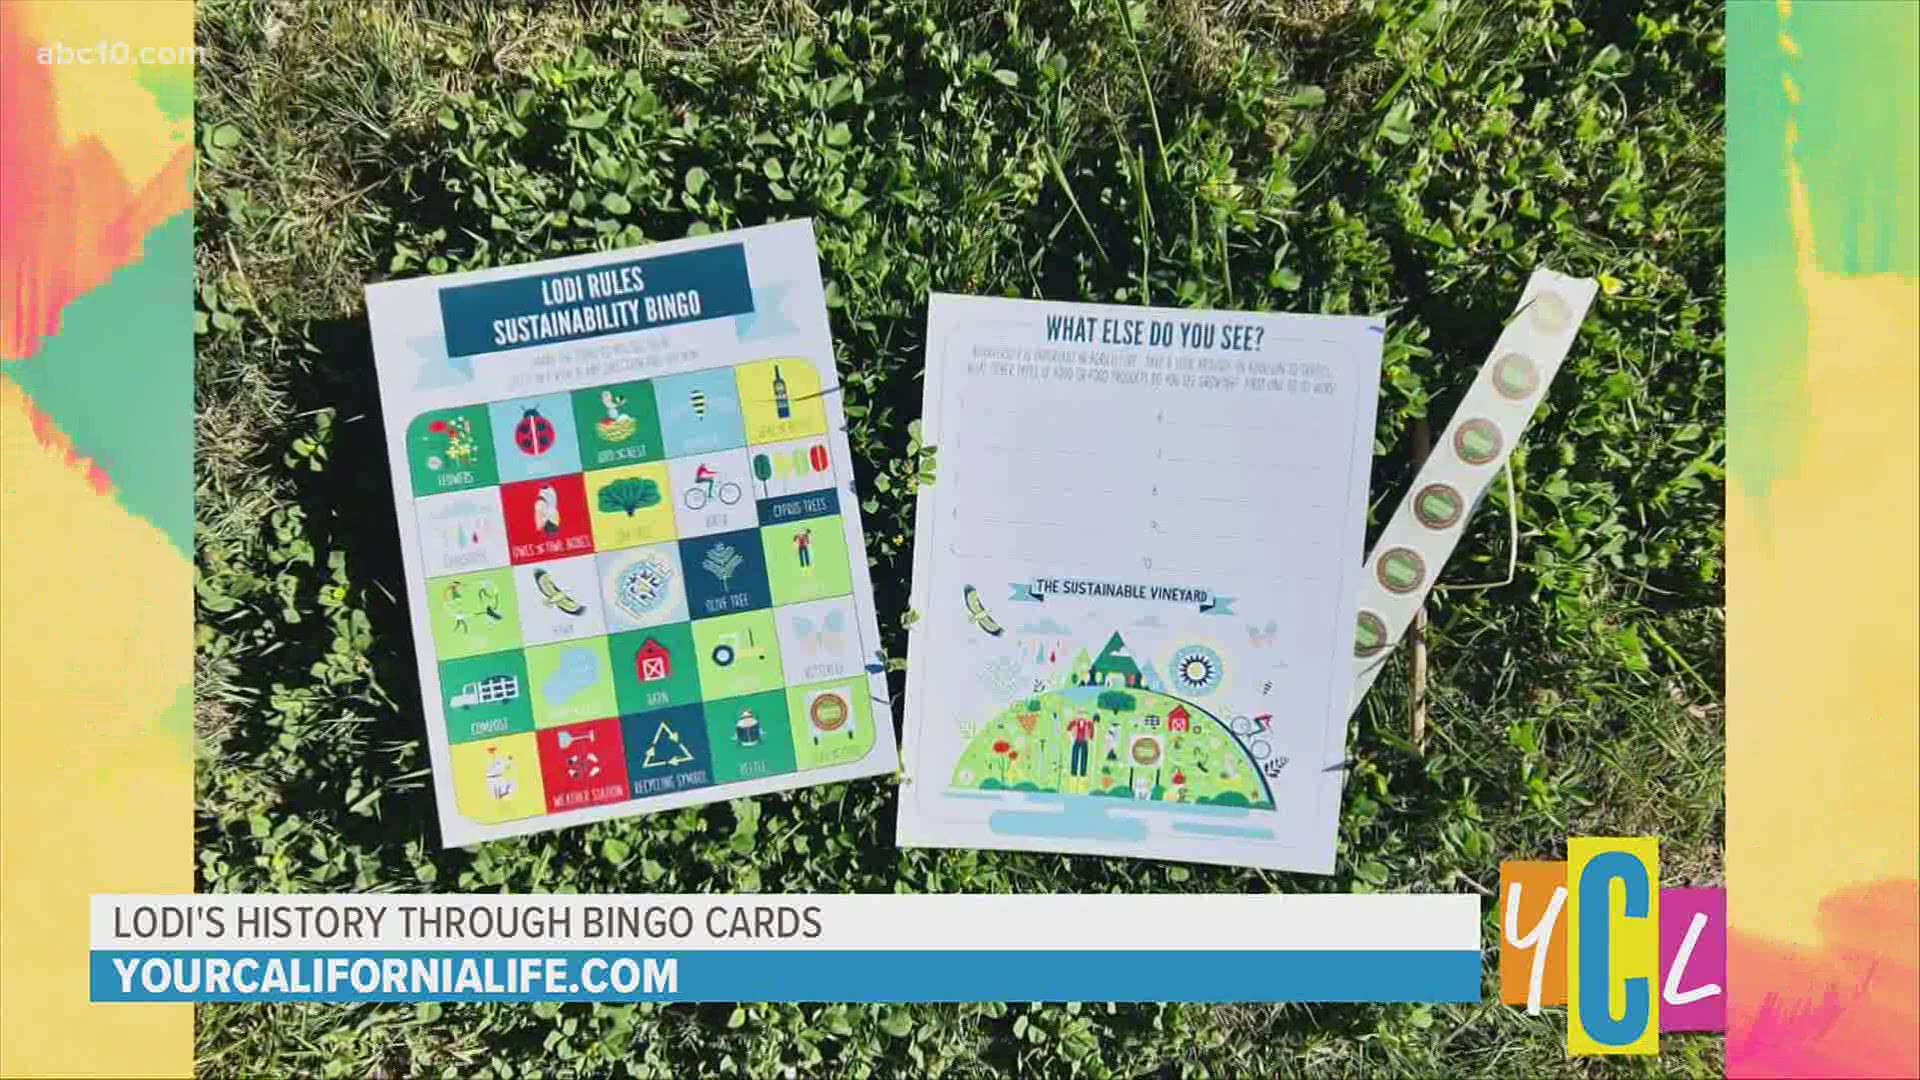 LODI RULES, has introduced a fun and interactive way to get out and into the rich soils of the Lodi wine region with a Sustainability Bingo Scavenger Hunt.